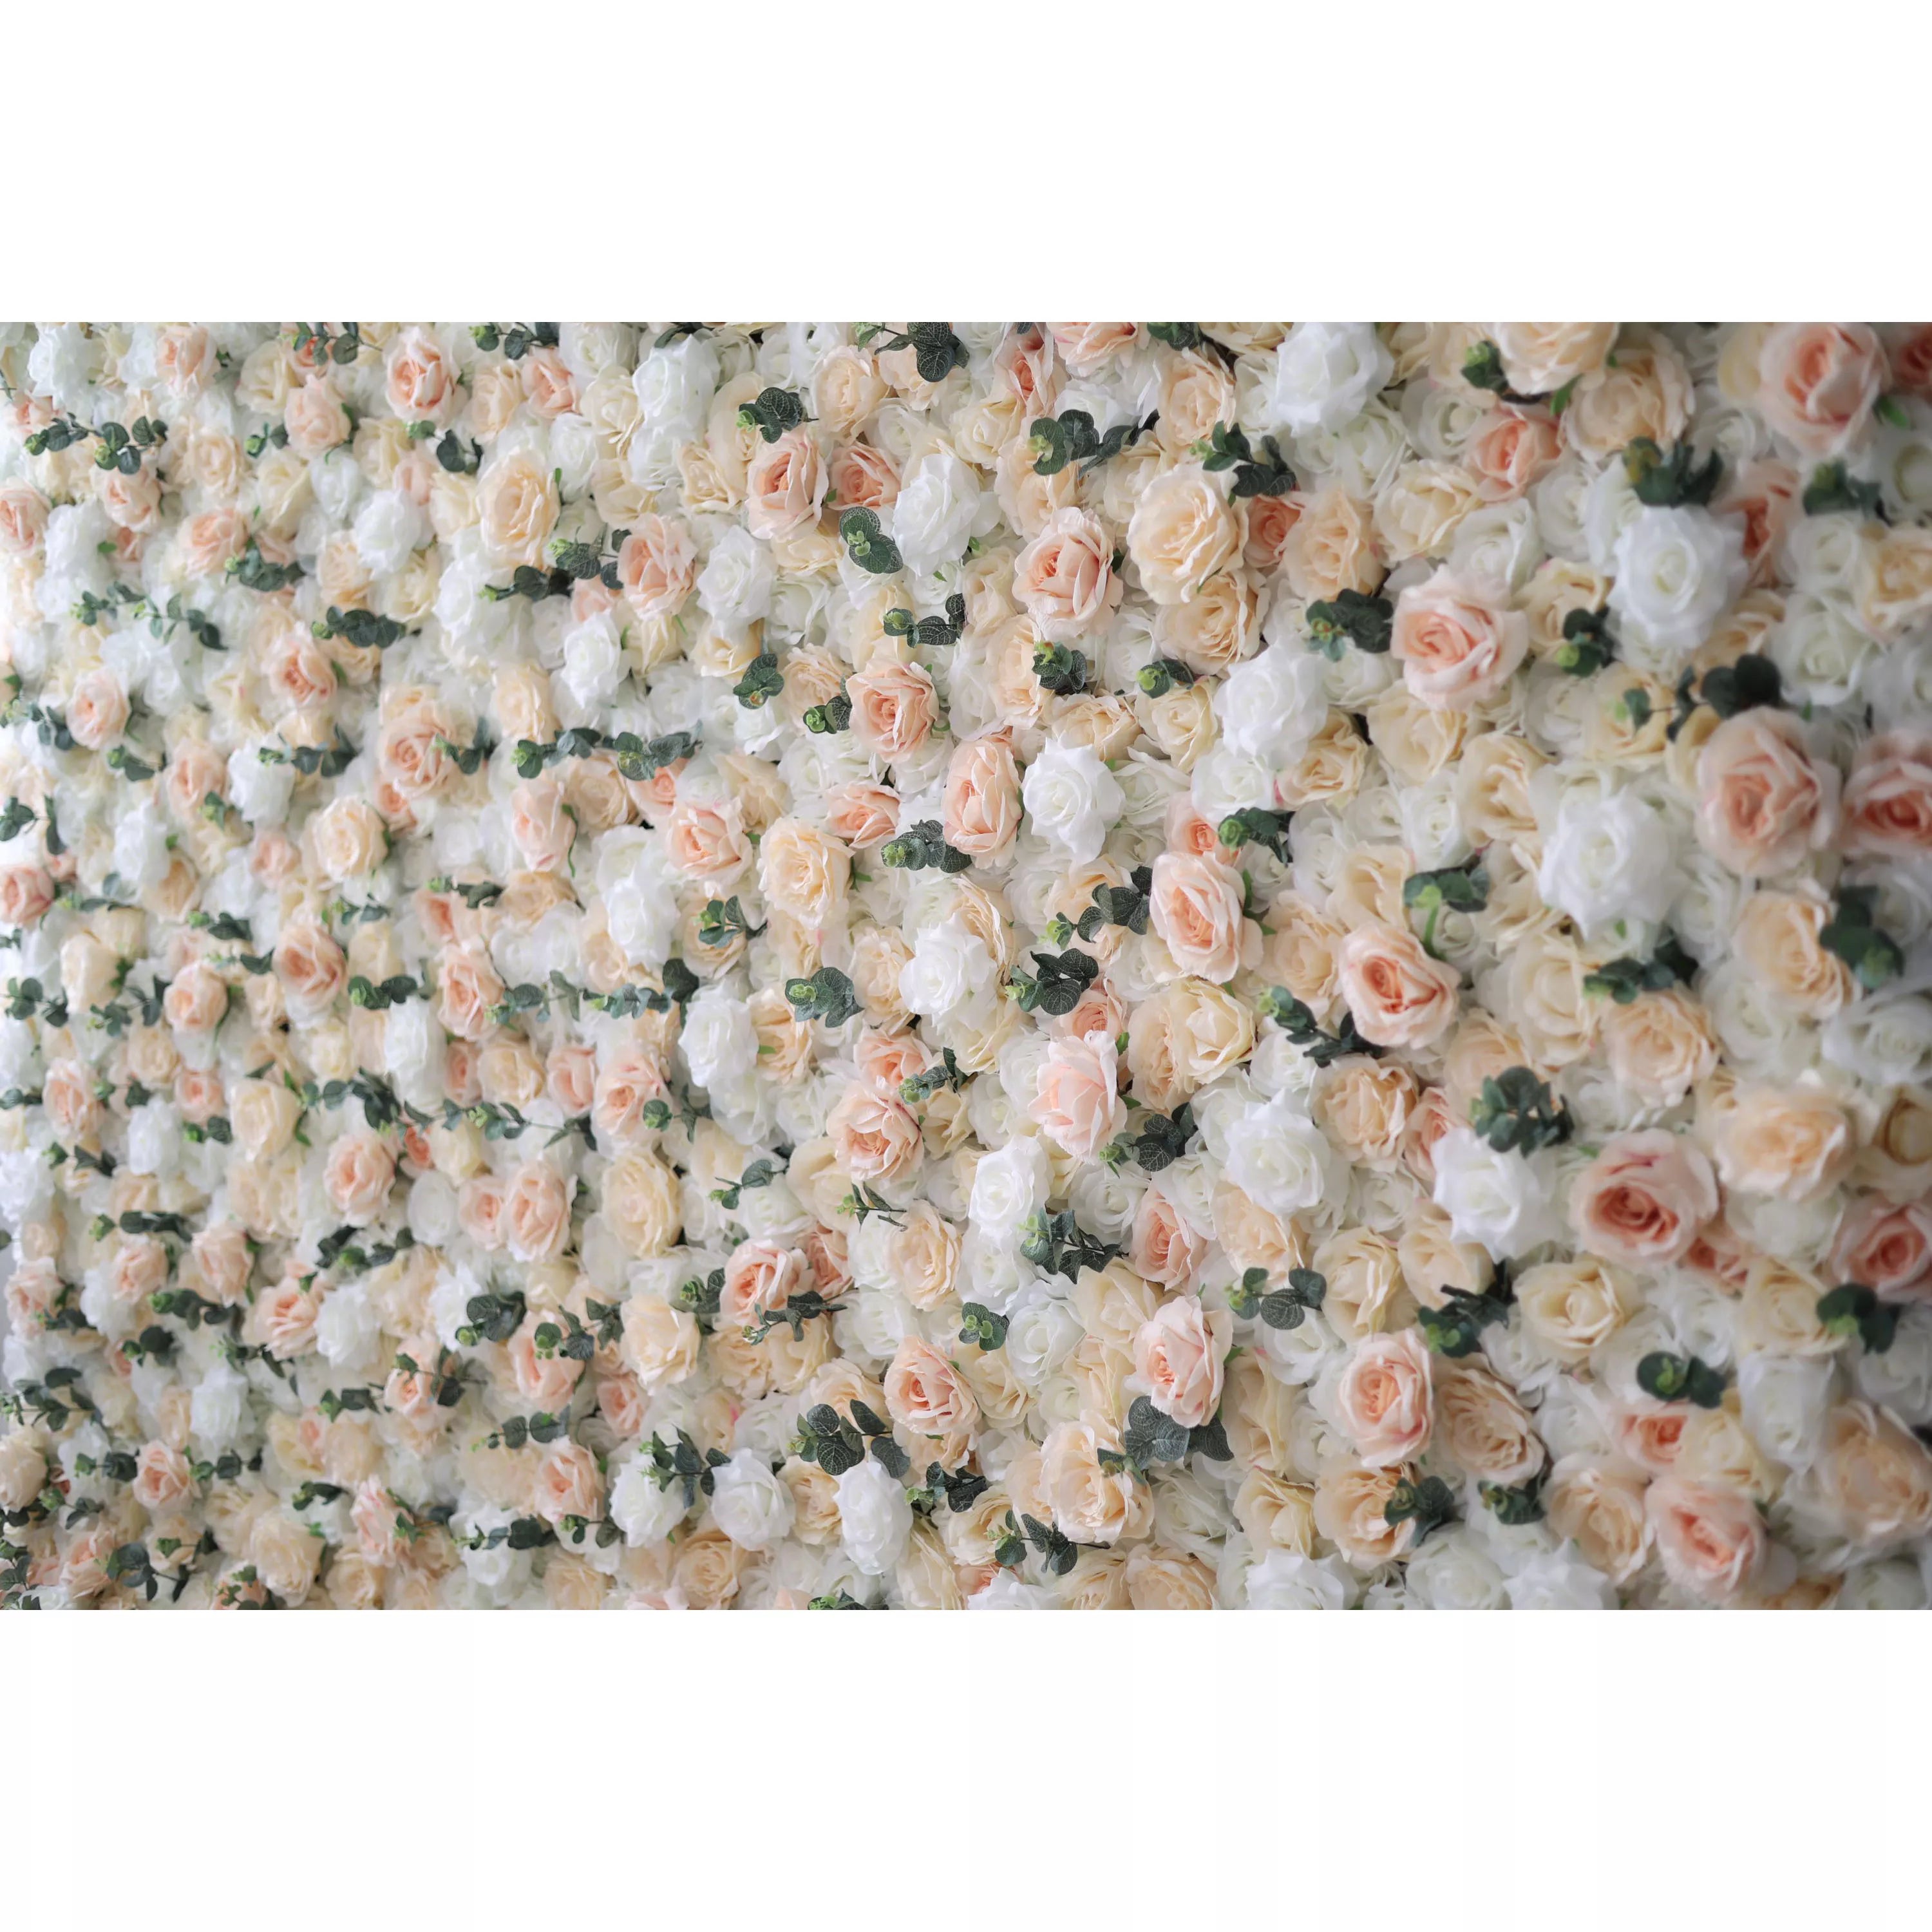 Valar Flowers artificial white and rose fog flower wall backdrop made of fabric for wedding and event decor, perfect for photography4